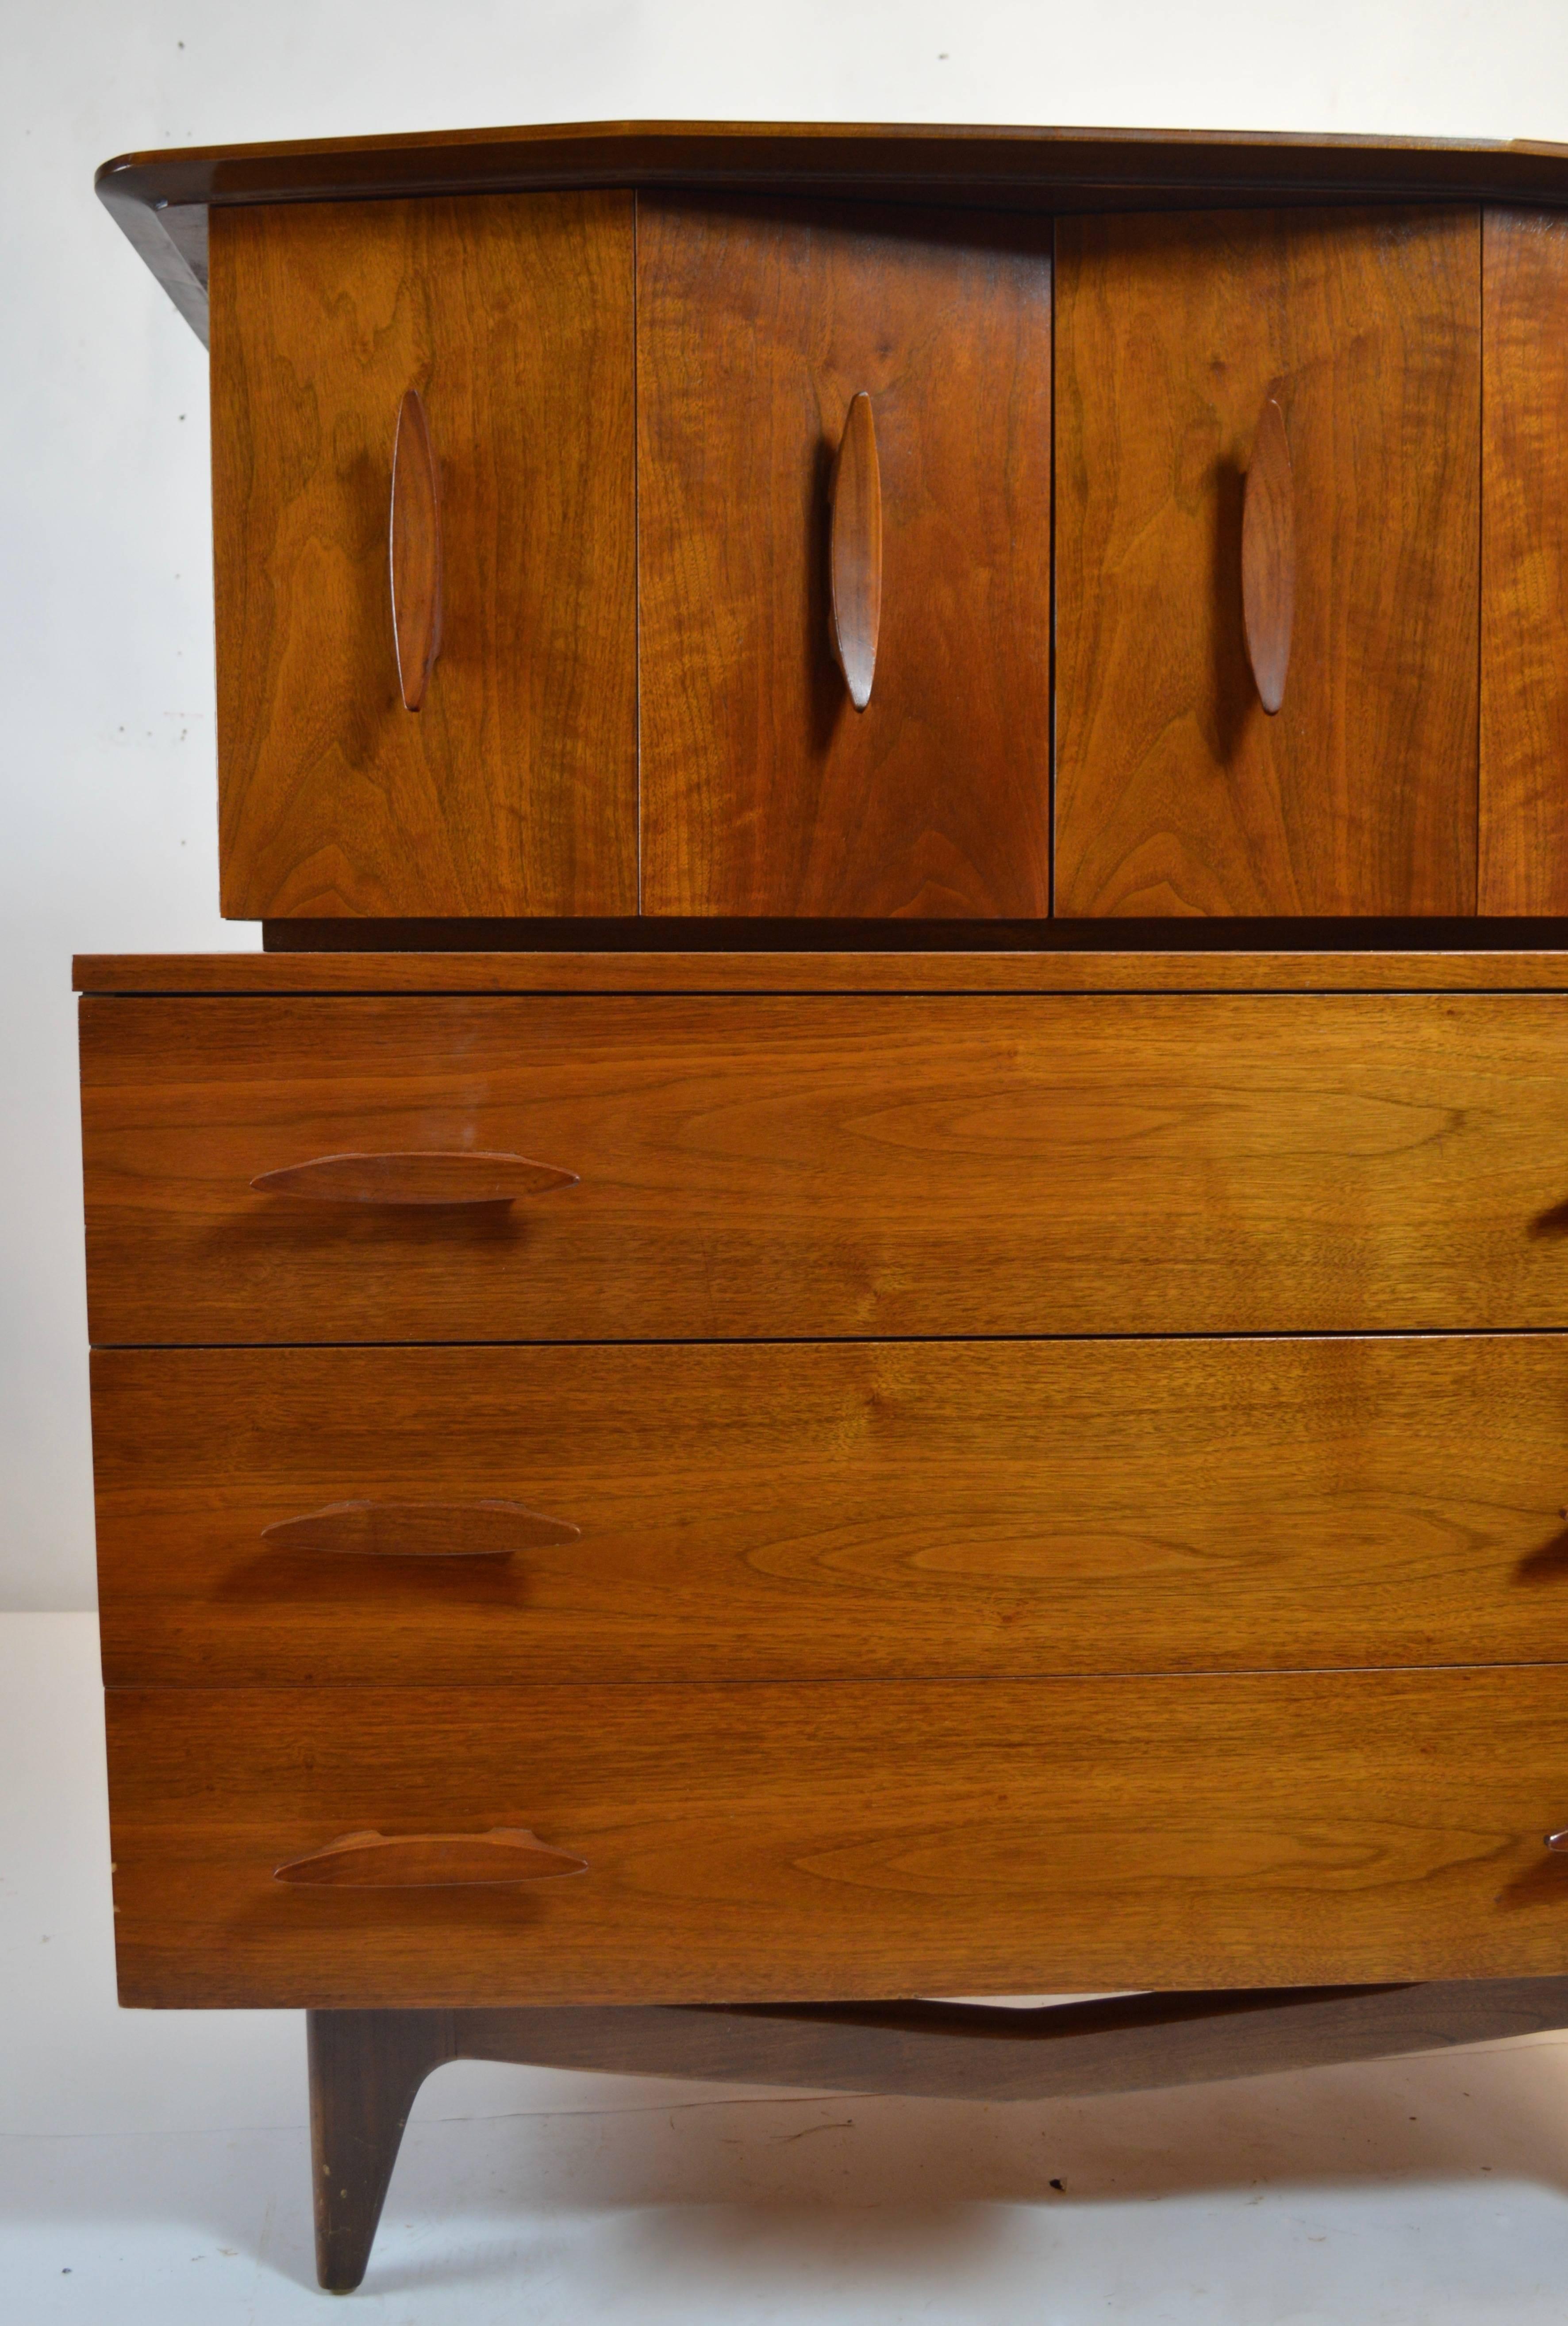 Stylish chest on chest form gentleman's dresser, having folding doors on top which open to revel four large interior drawers, and three oversized drawers on the bottom. This chest has ample storage and is in very good original condition, showing